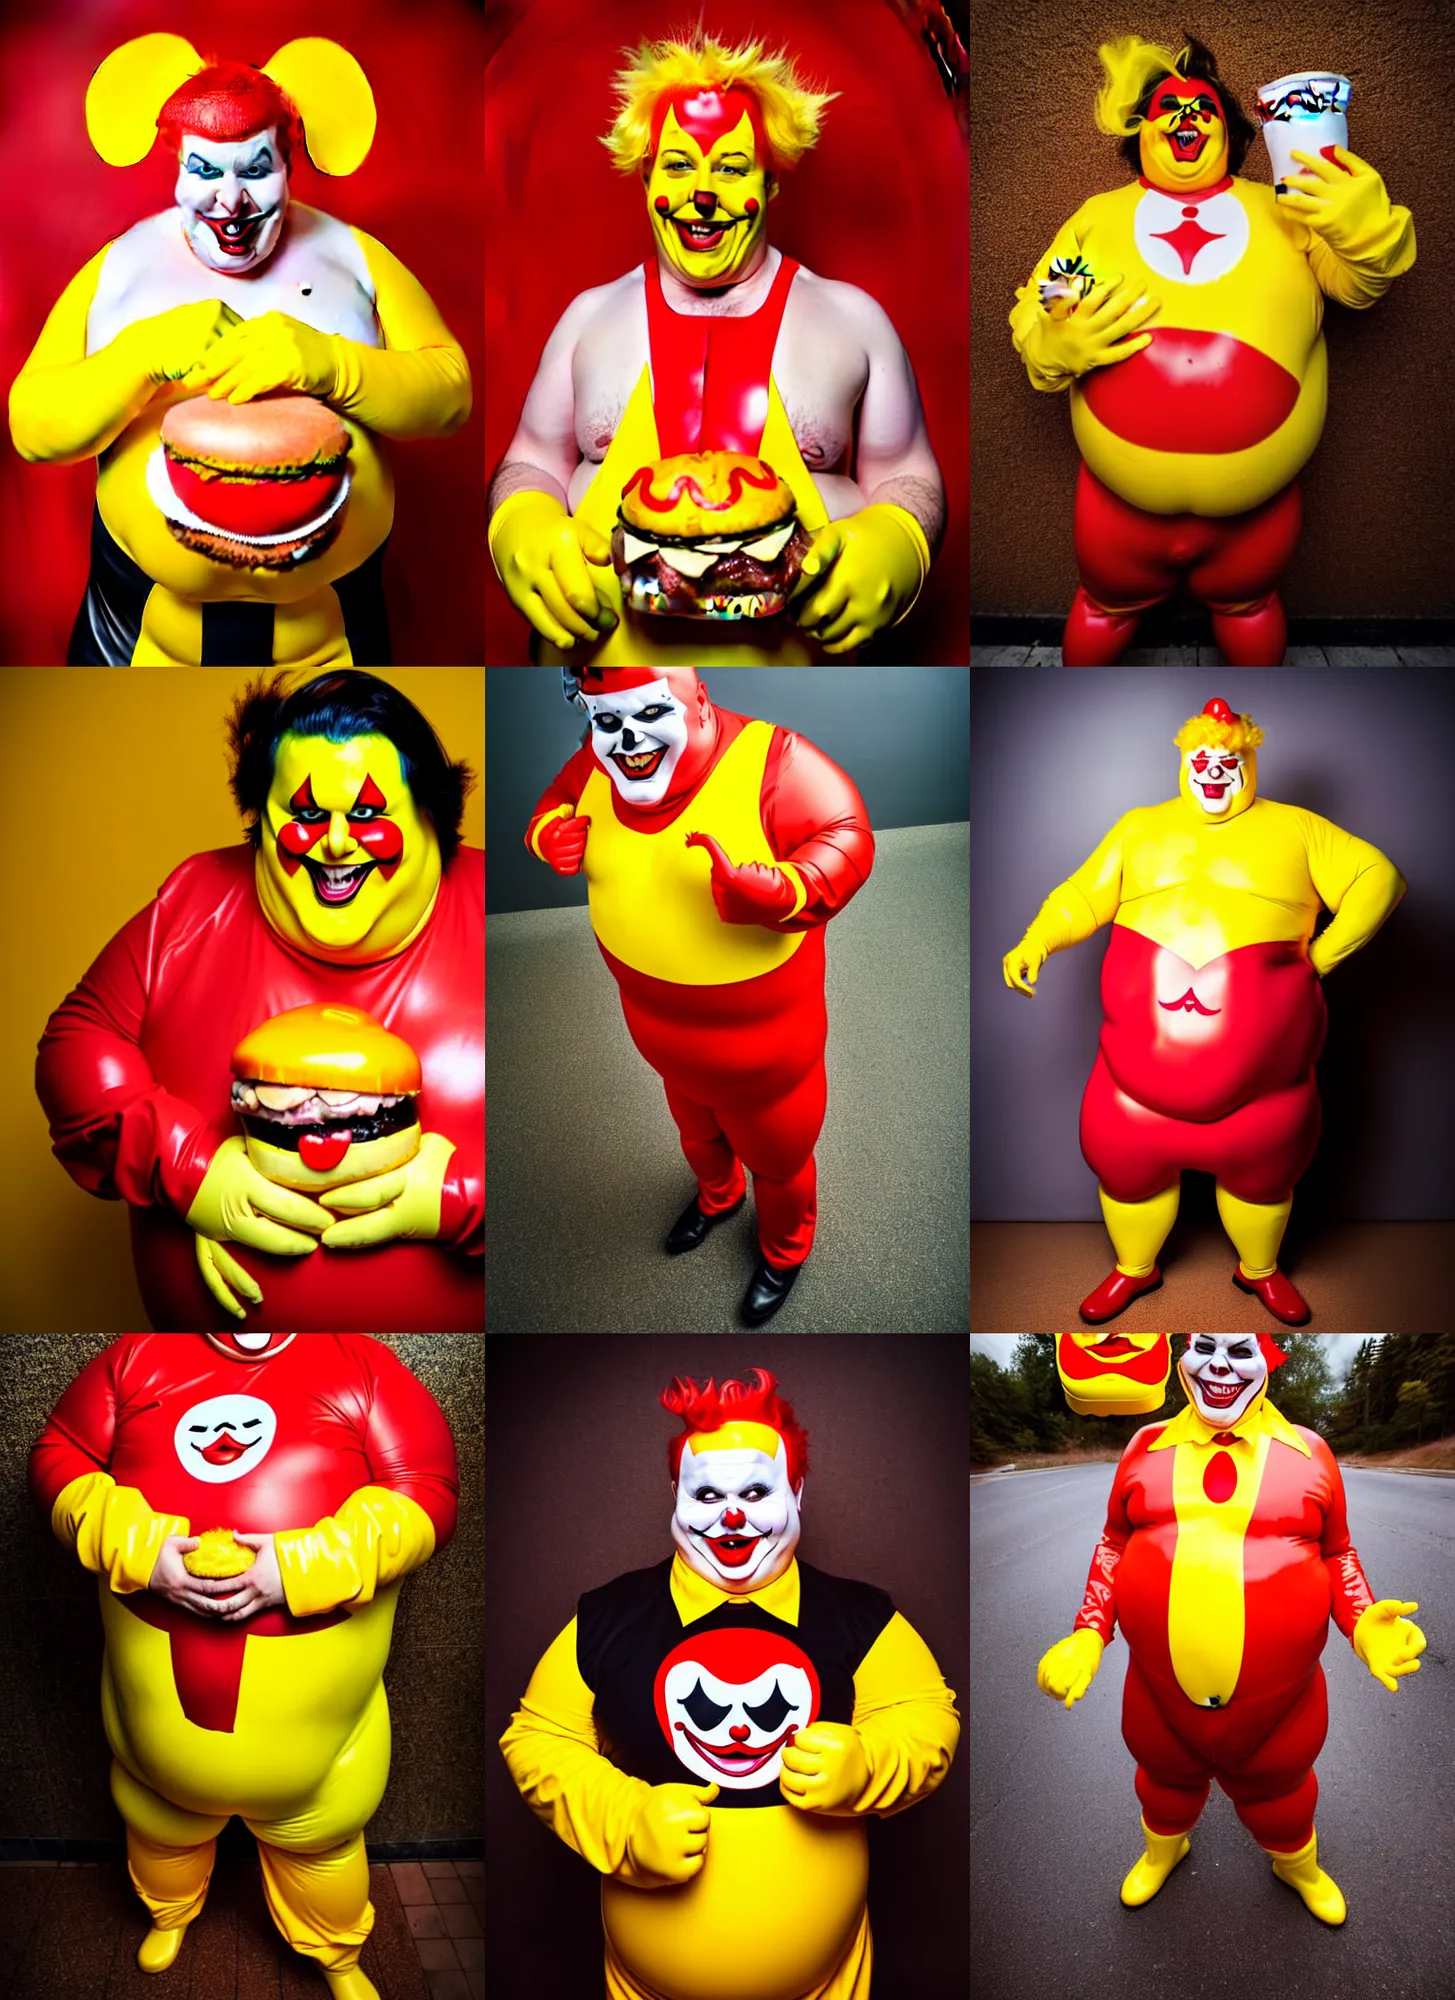 Prompt: low wide angle view portrait of a very chubby evil looking joker dressed in yellow and red rubber latex Ronald Macdonalds costume, holding a sloppy huge hamburger, red hair, a Macdonalds logo on his chest, photography inspired by Oleg Vdovenko